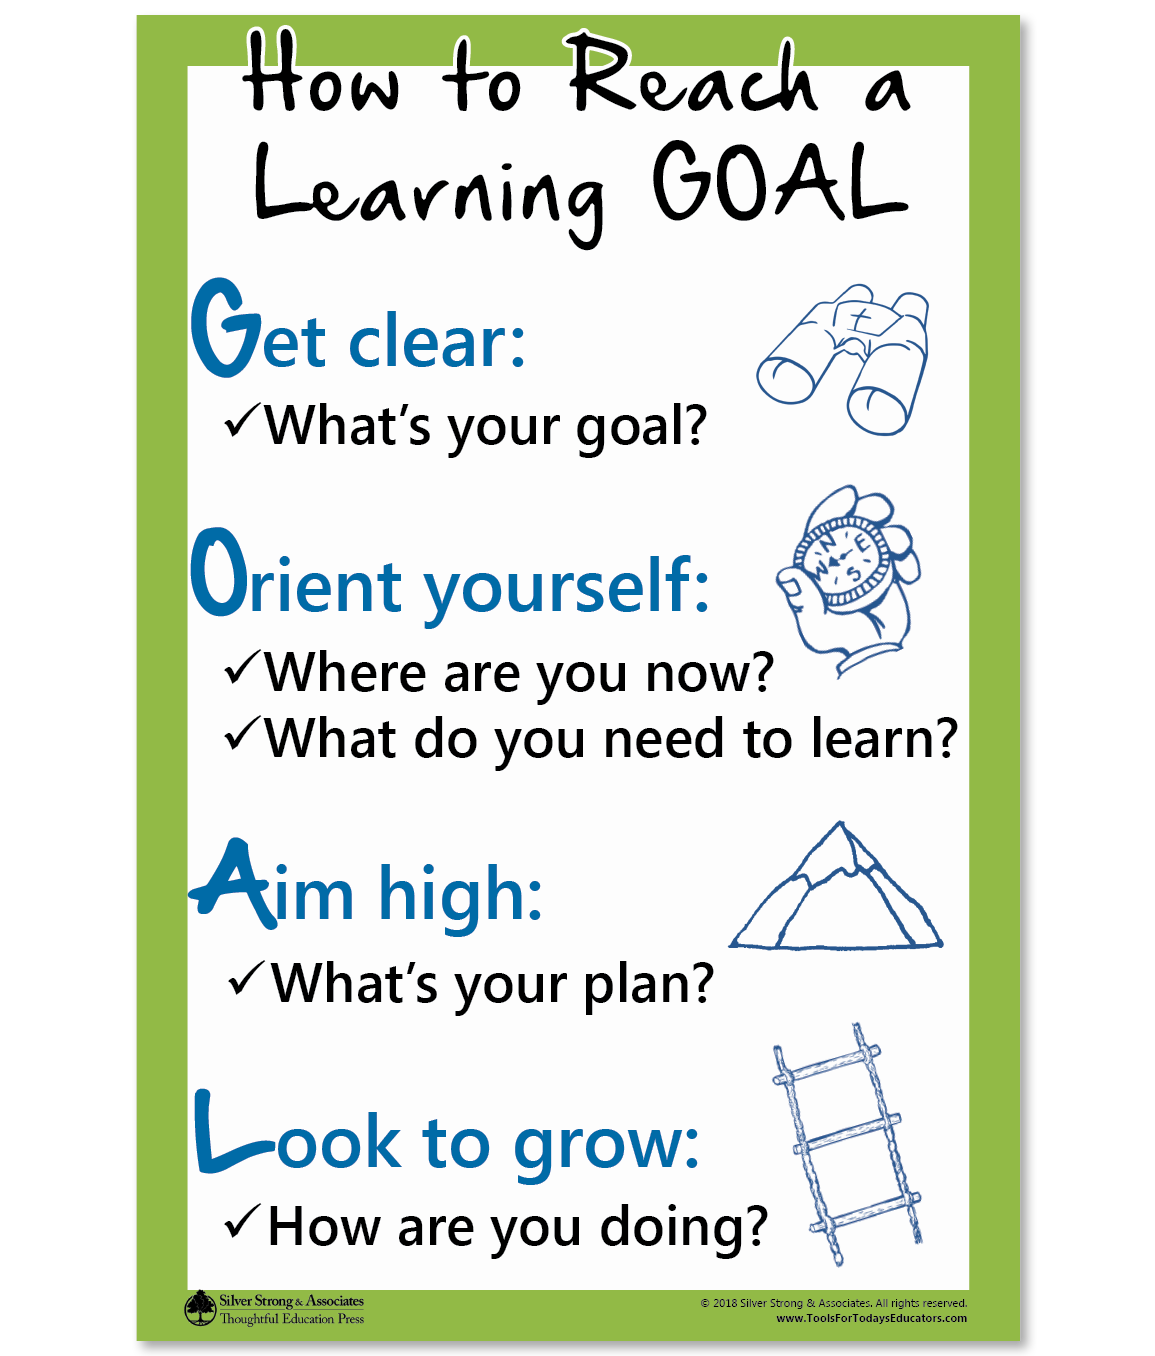 how-to-reach-a-learning-goal-poster-silver-strong-associates